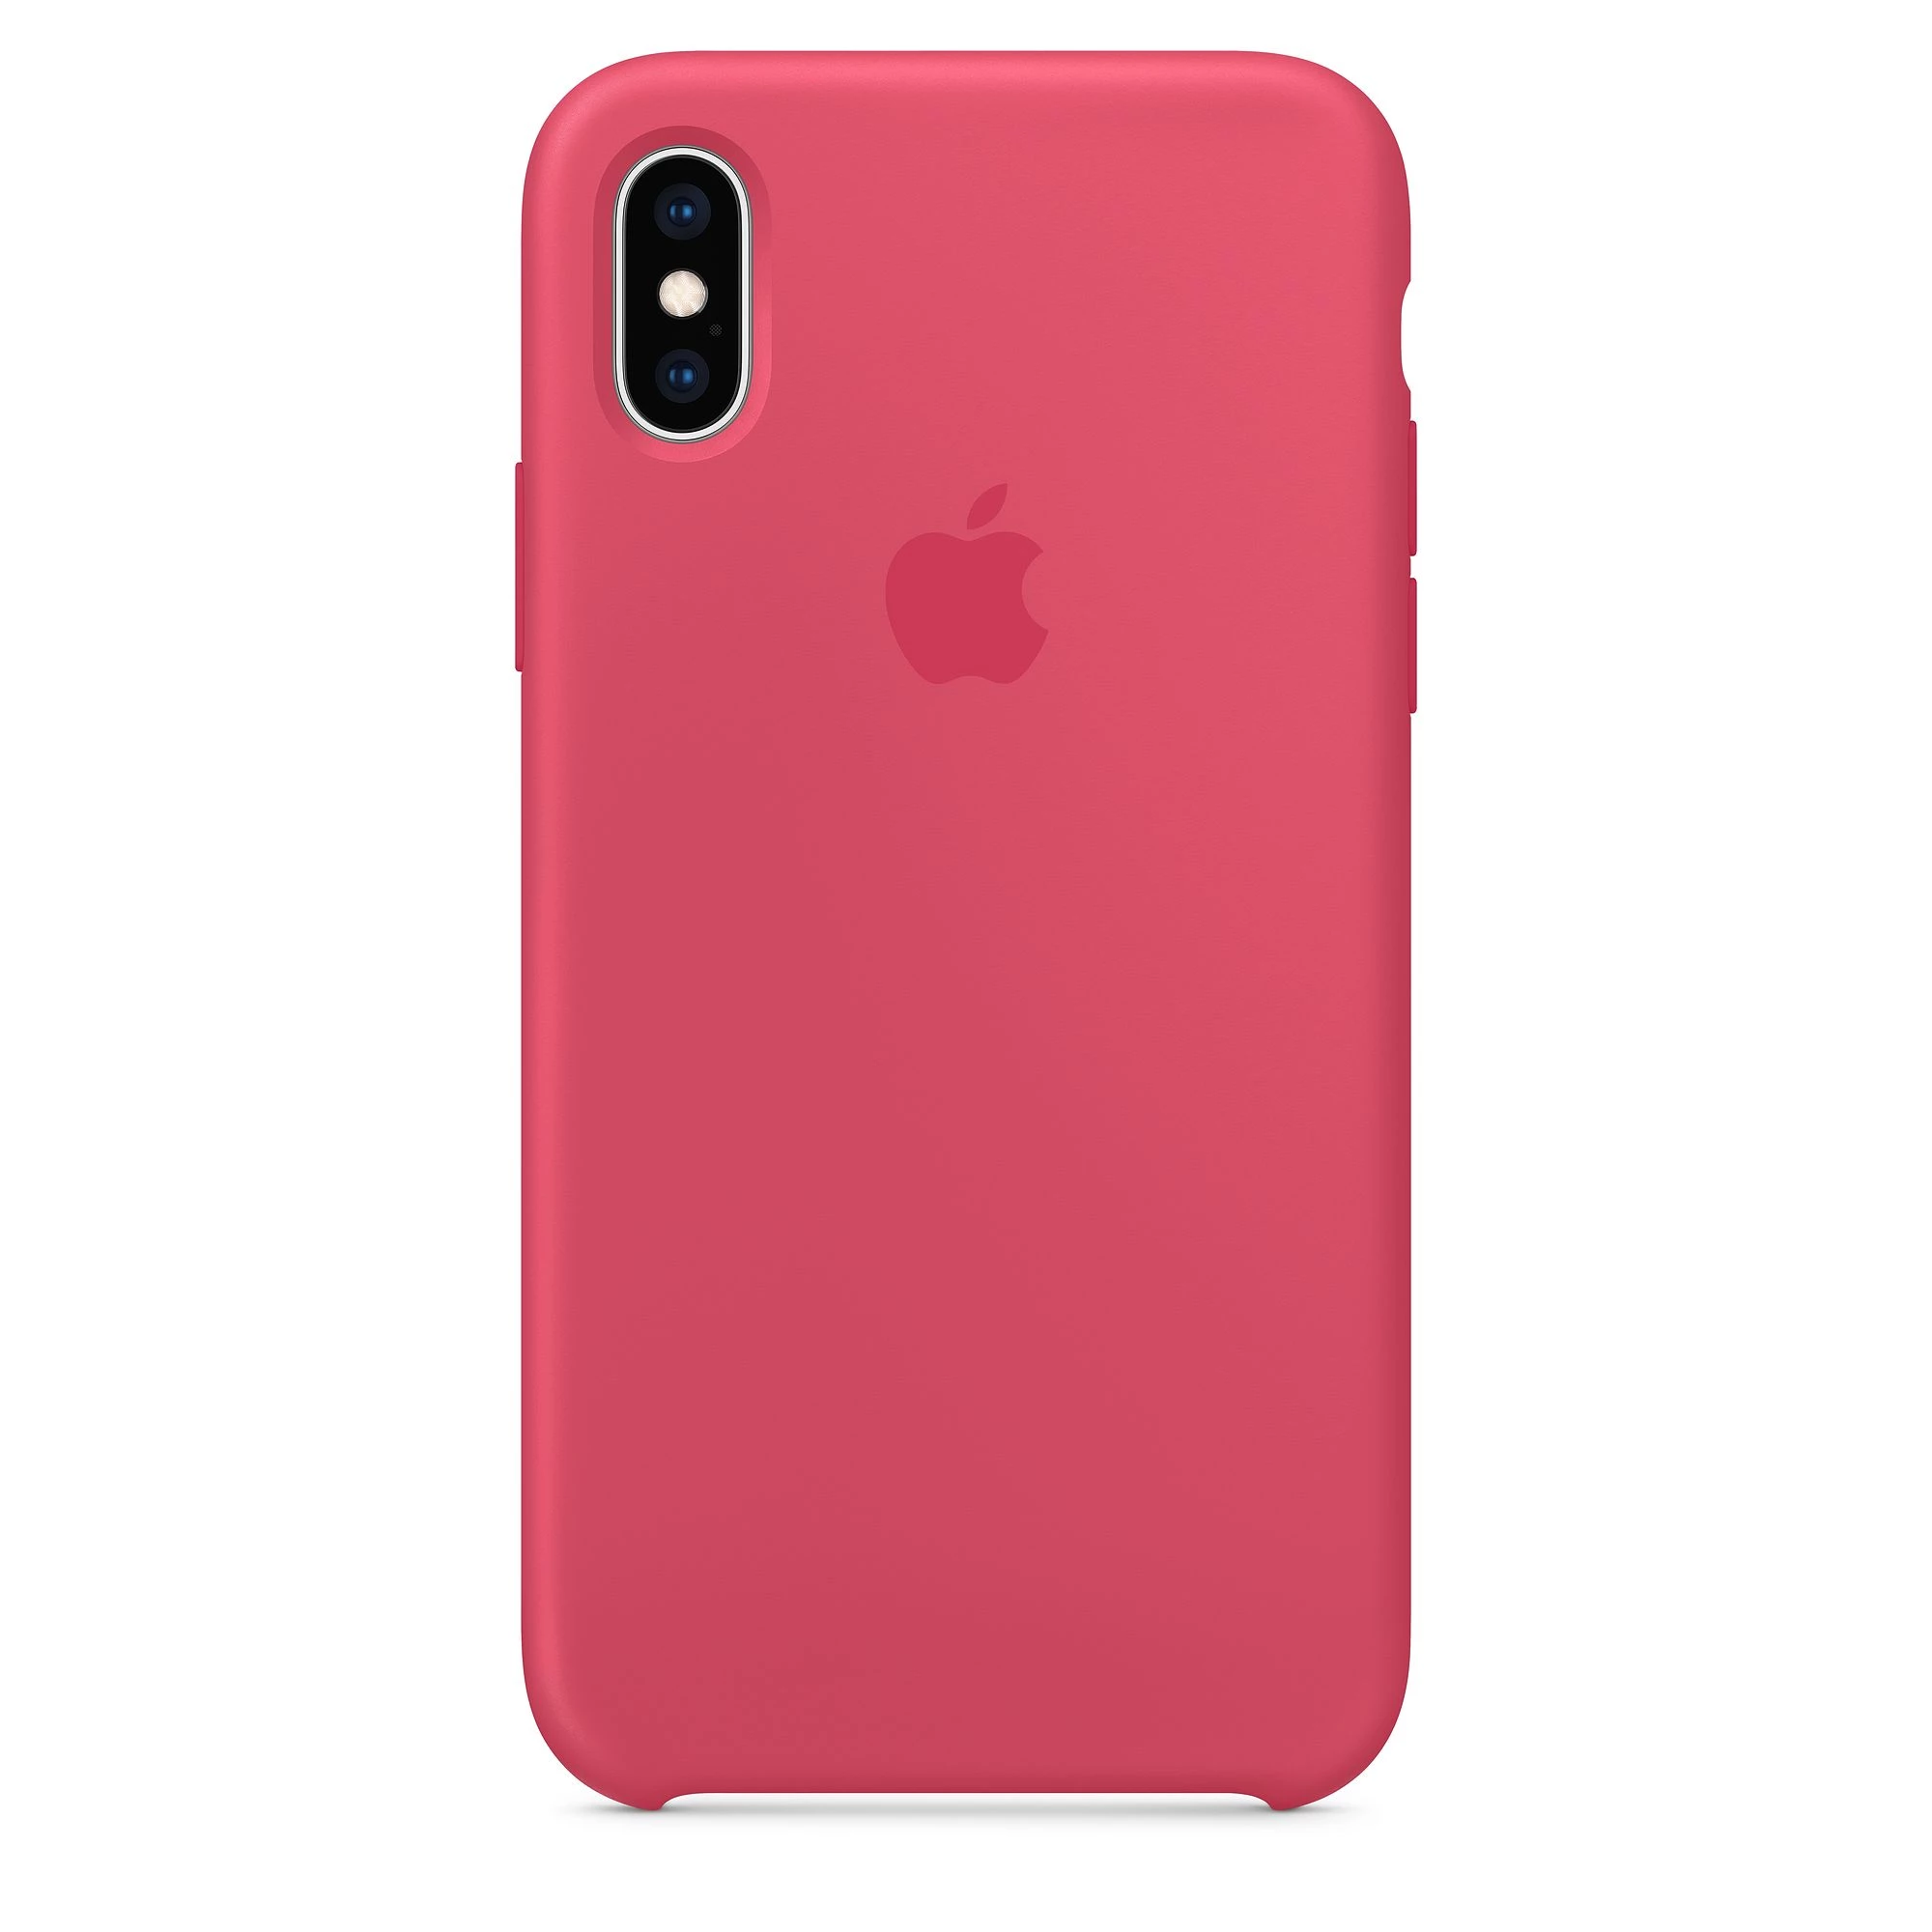 Apple iPhone X / XS Silicone Case LUX COPY - Hibiscus (MUJT2)